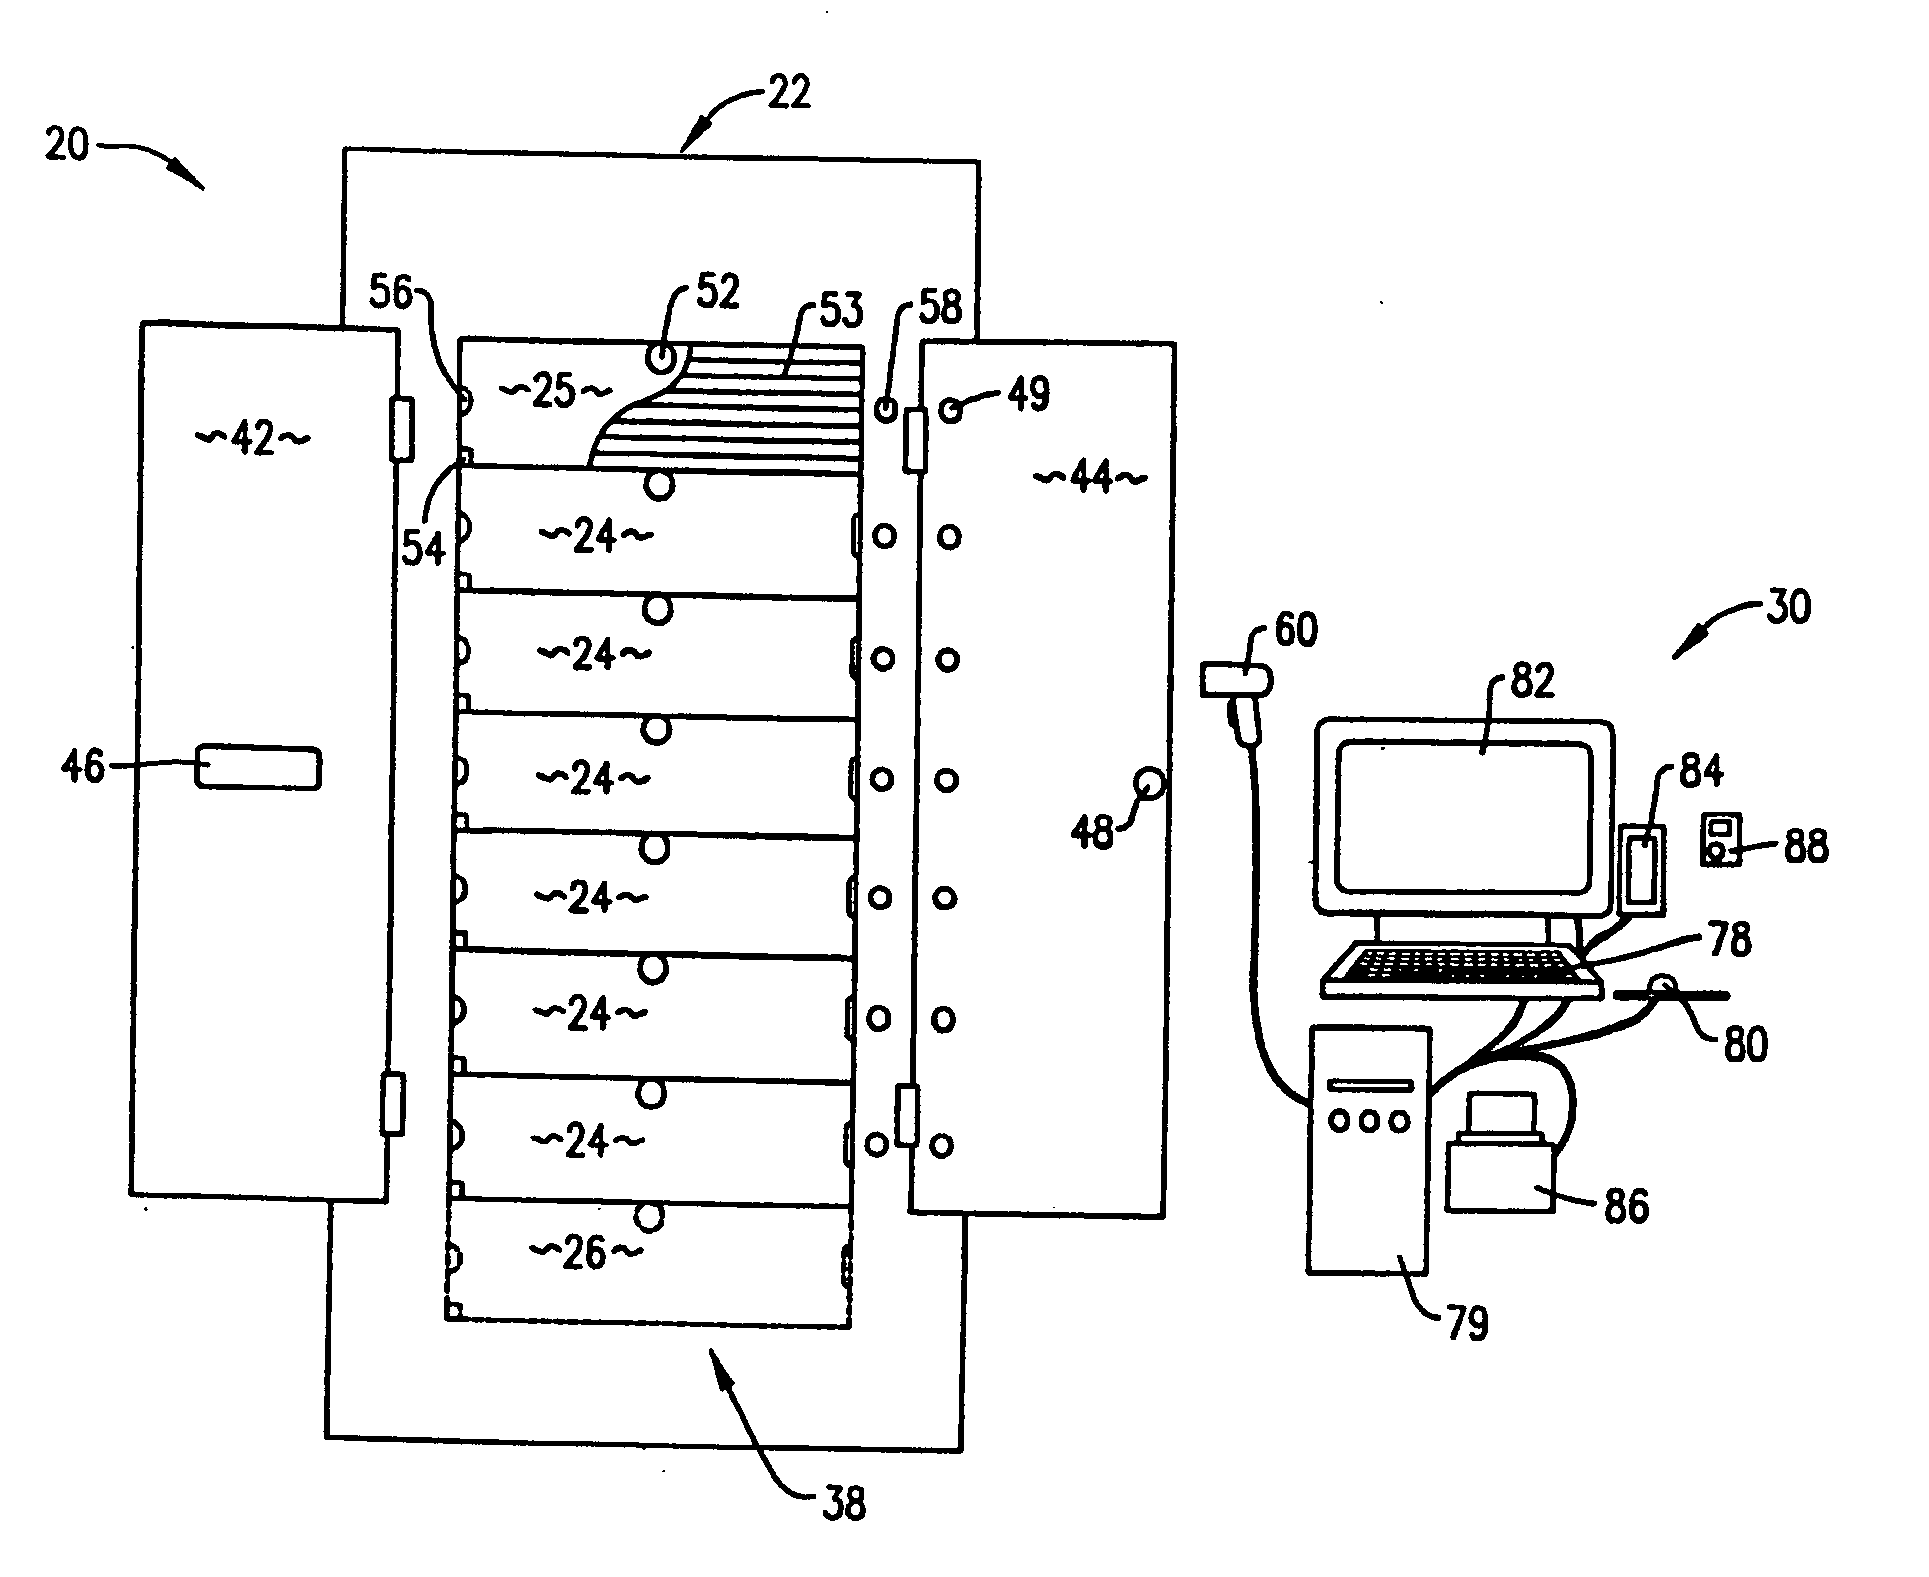 System, method, and computer program for managing storage and distribution of money tills or other items